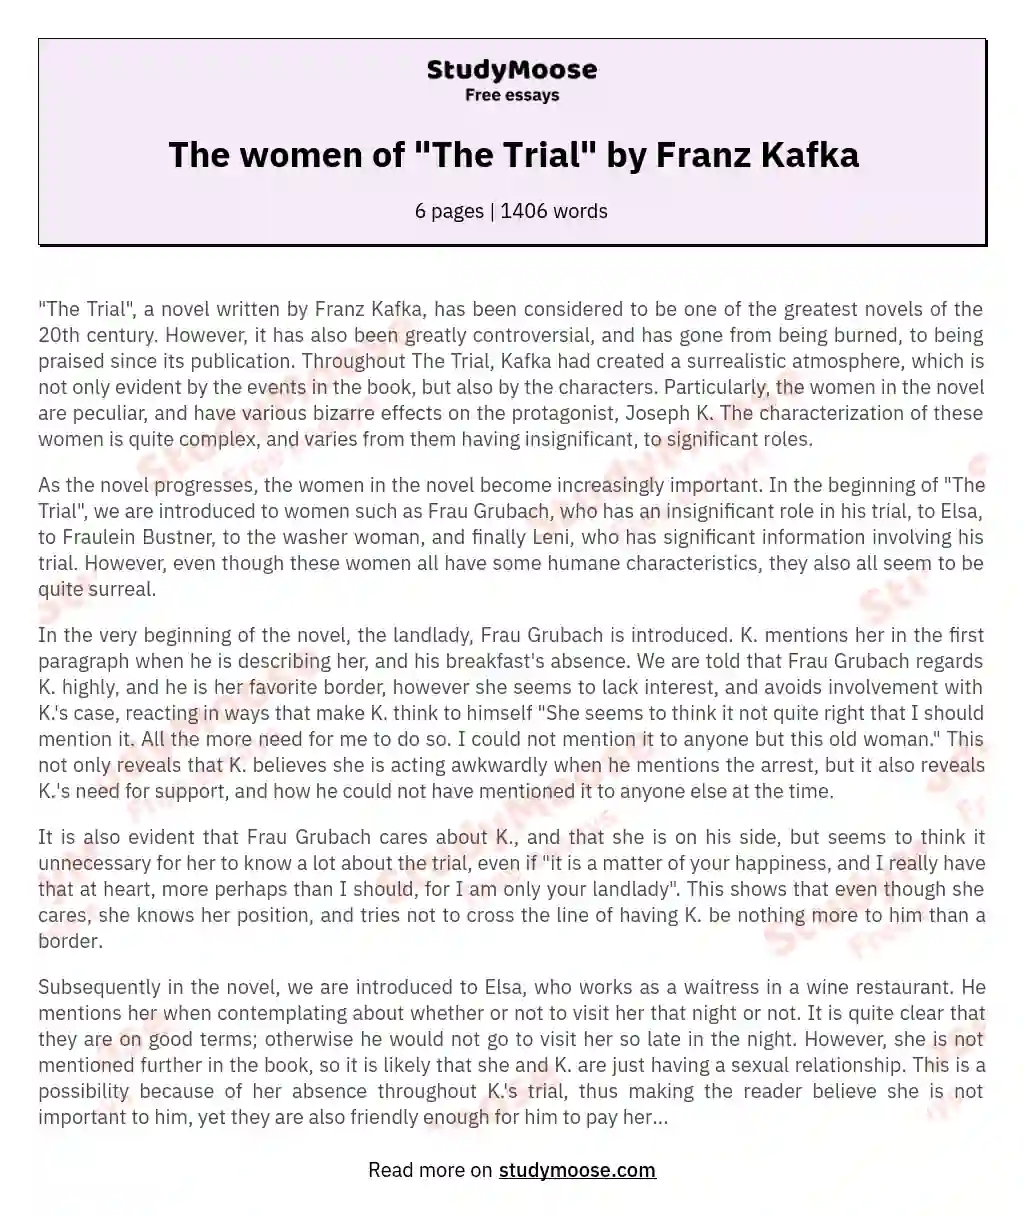 Surreal Role of Women in Kafka's 'The Trial' essay